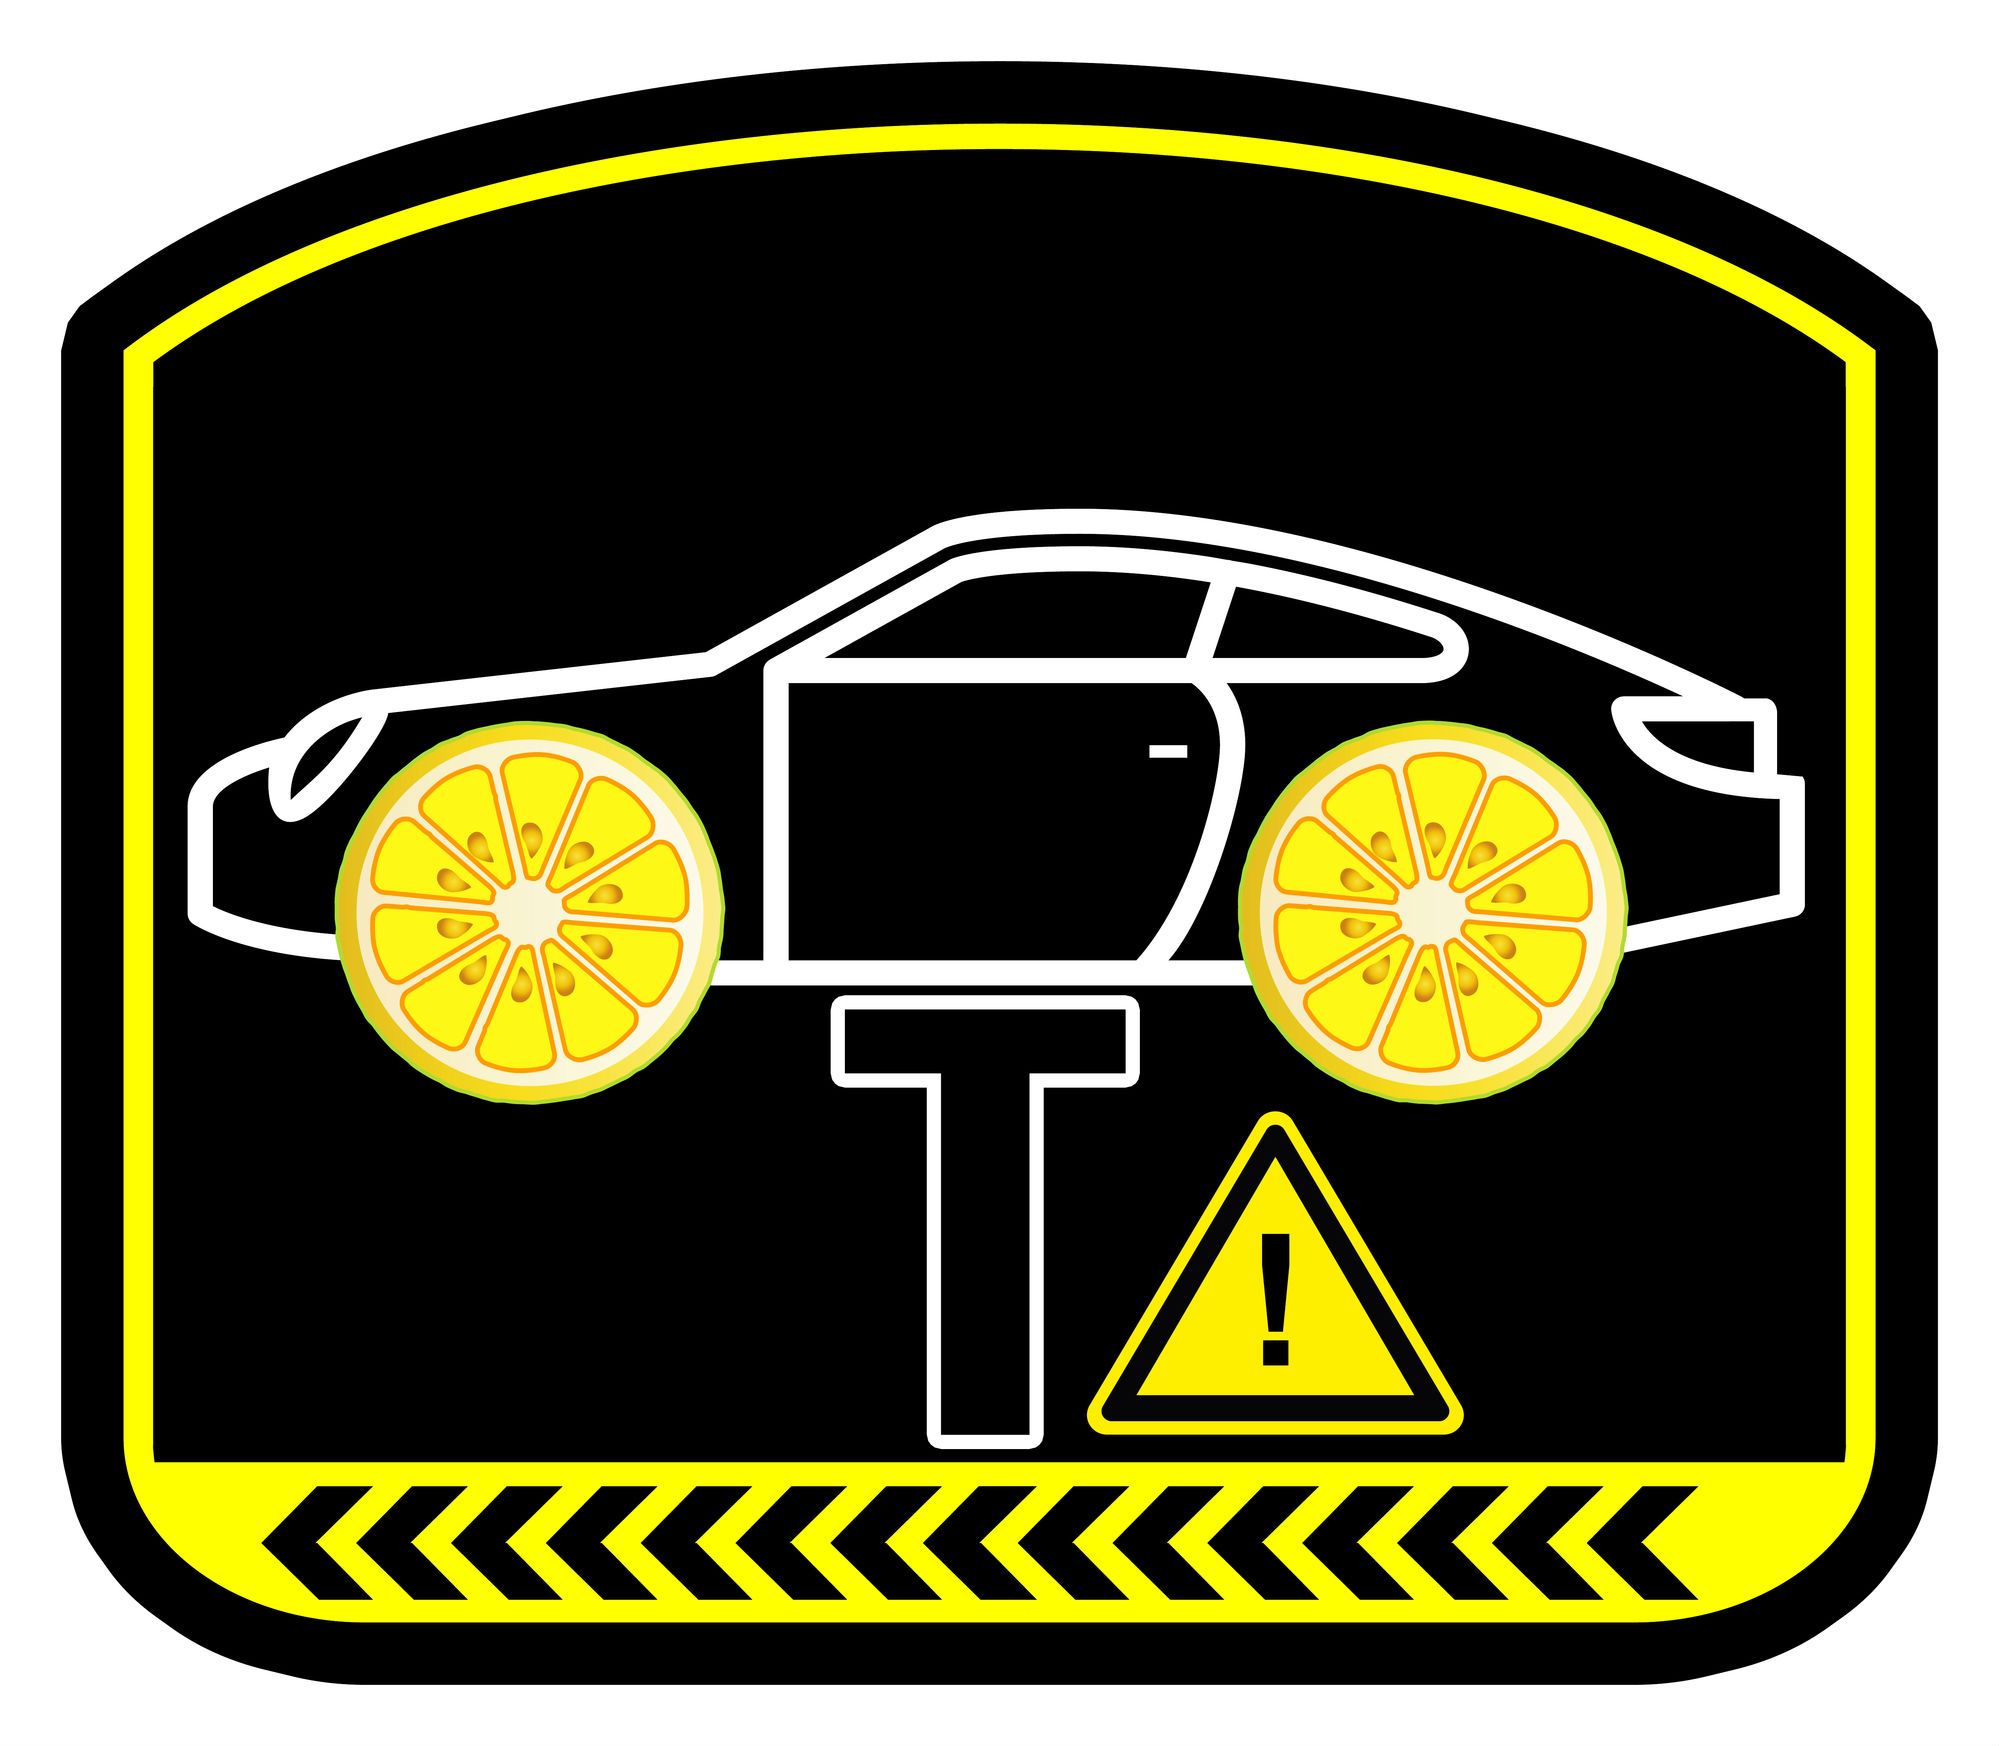 Consumers who have purchased defective vehicles may be able to apply for reimbursement or replacement under the Lemon Law in Texas.